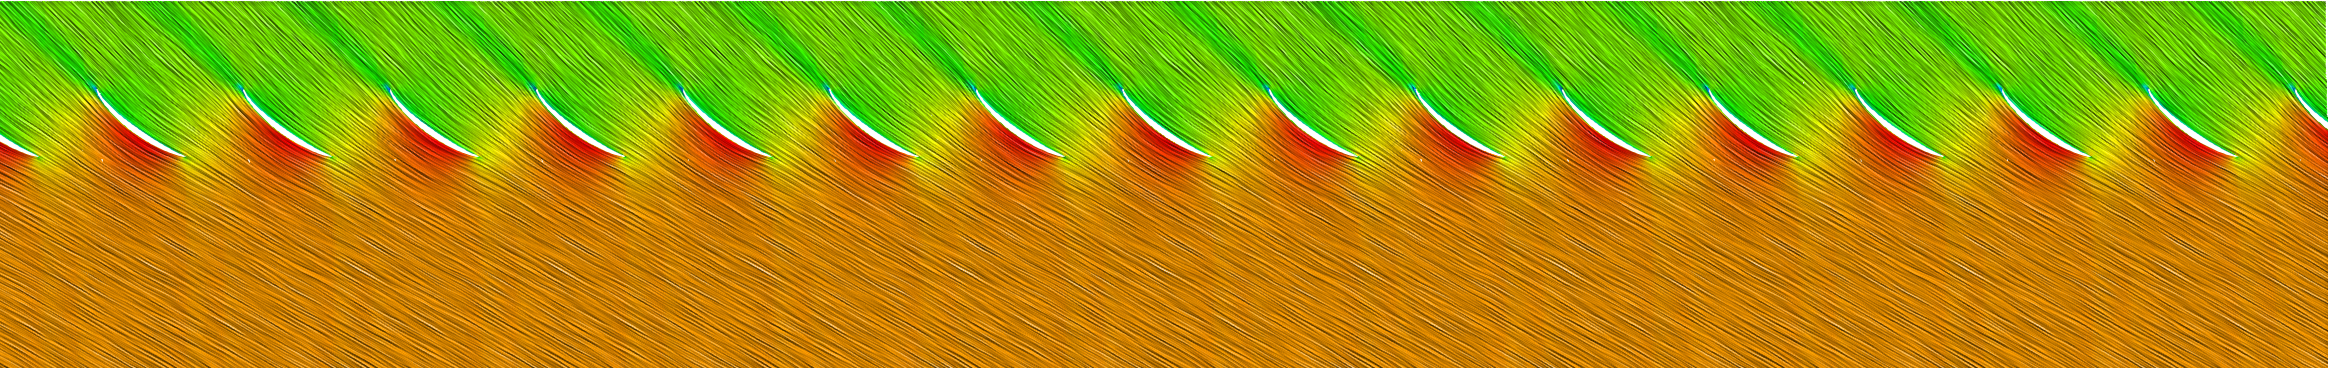 Axial Fan CFD Relative Velocity Blade to Blade View